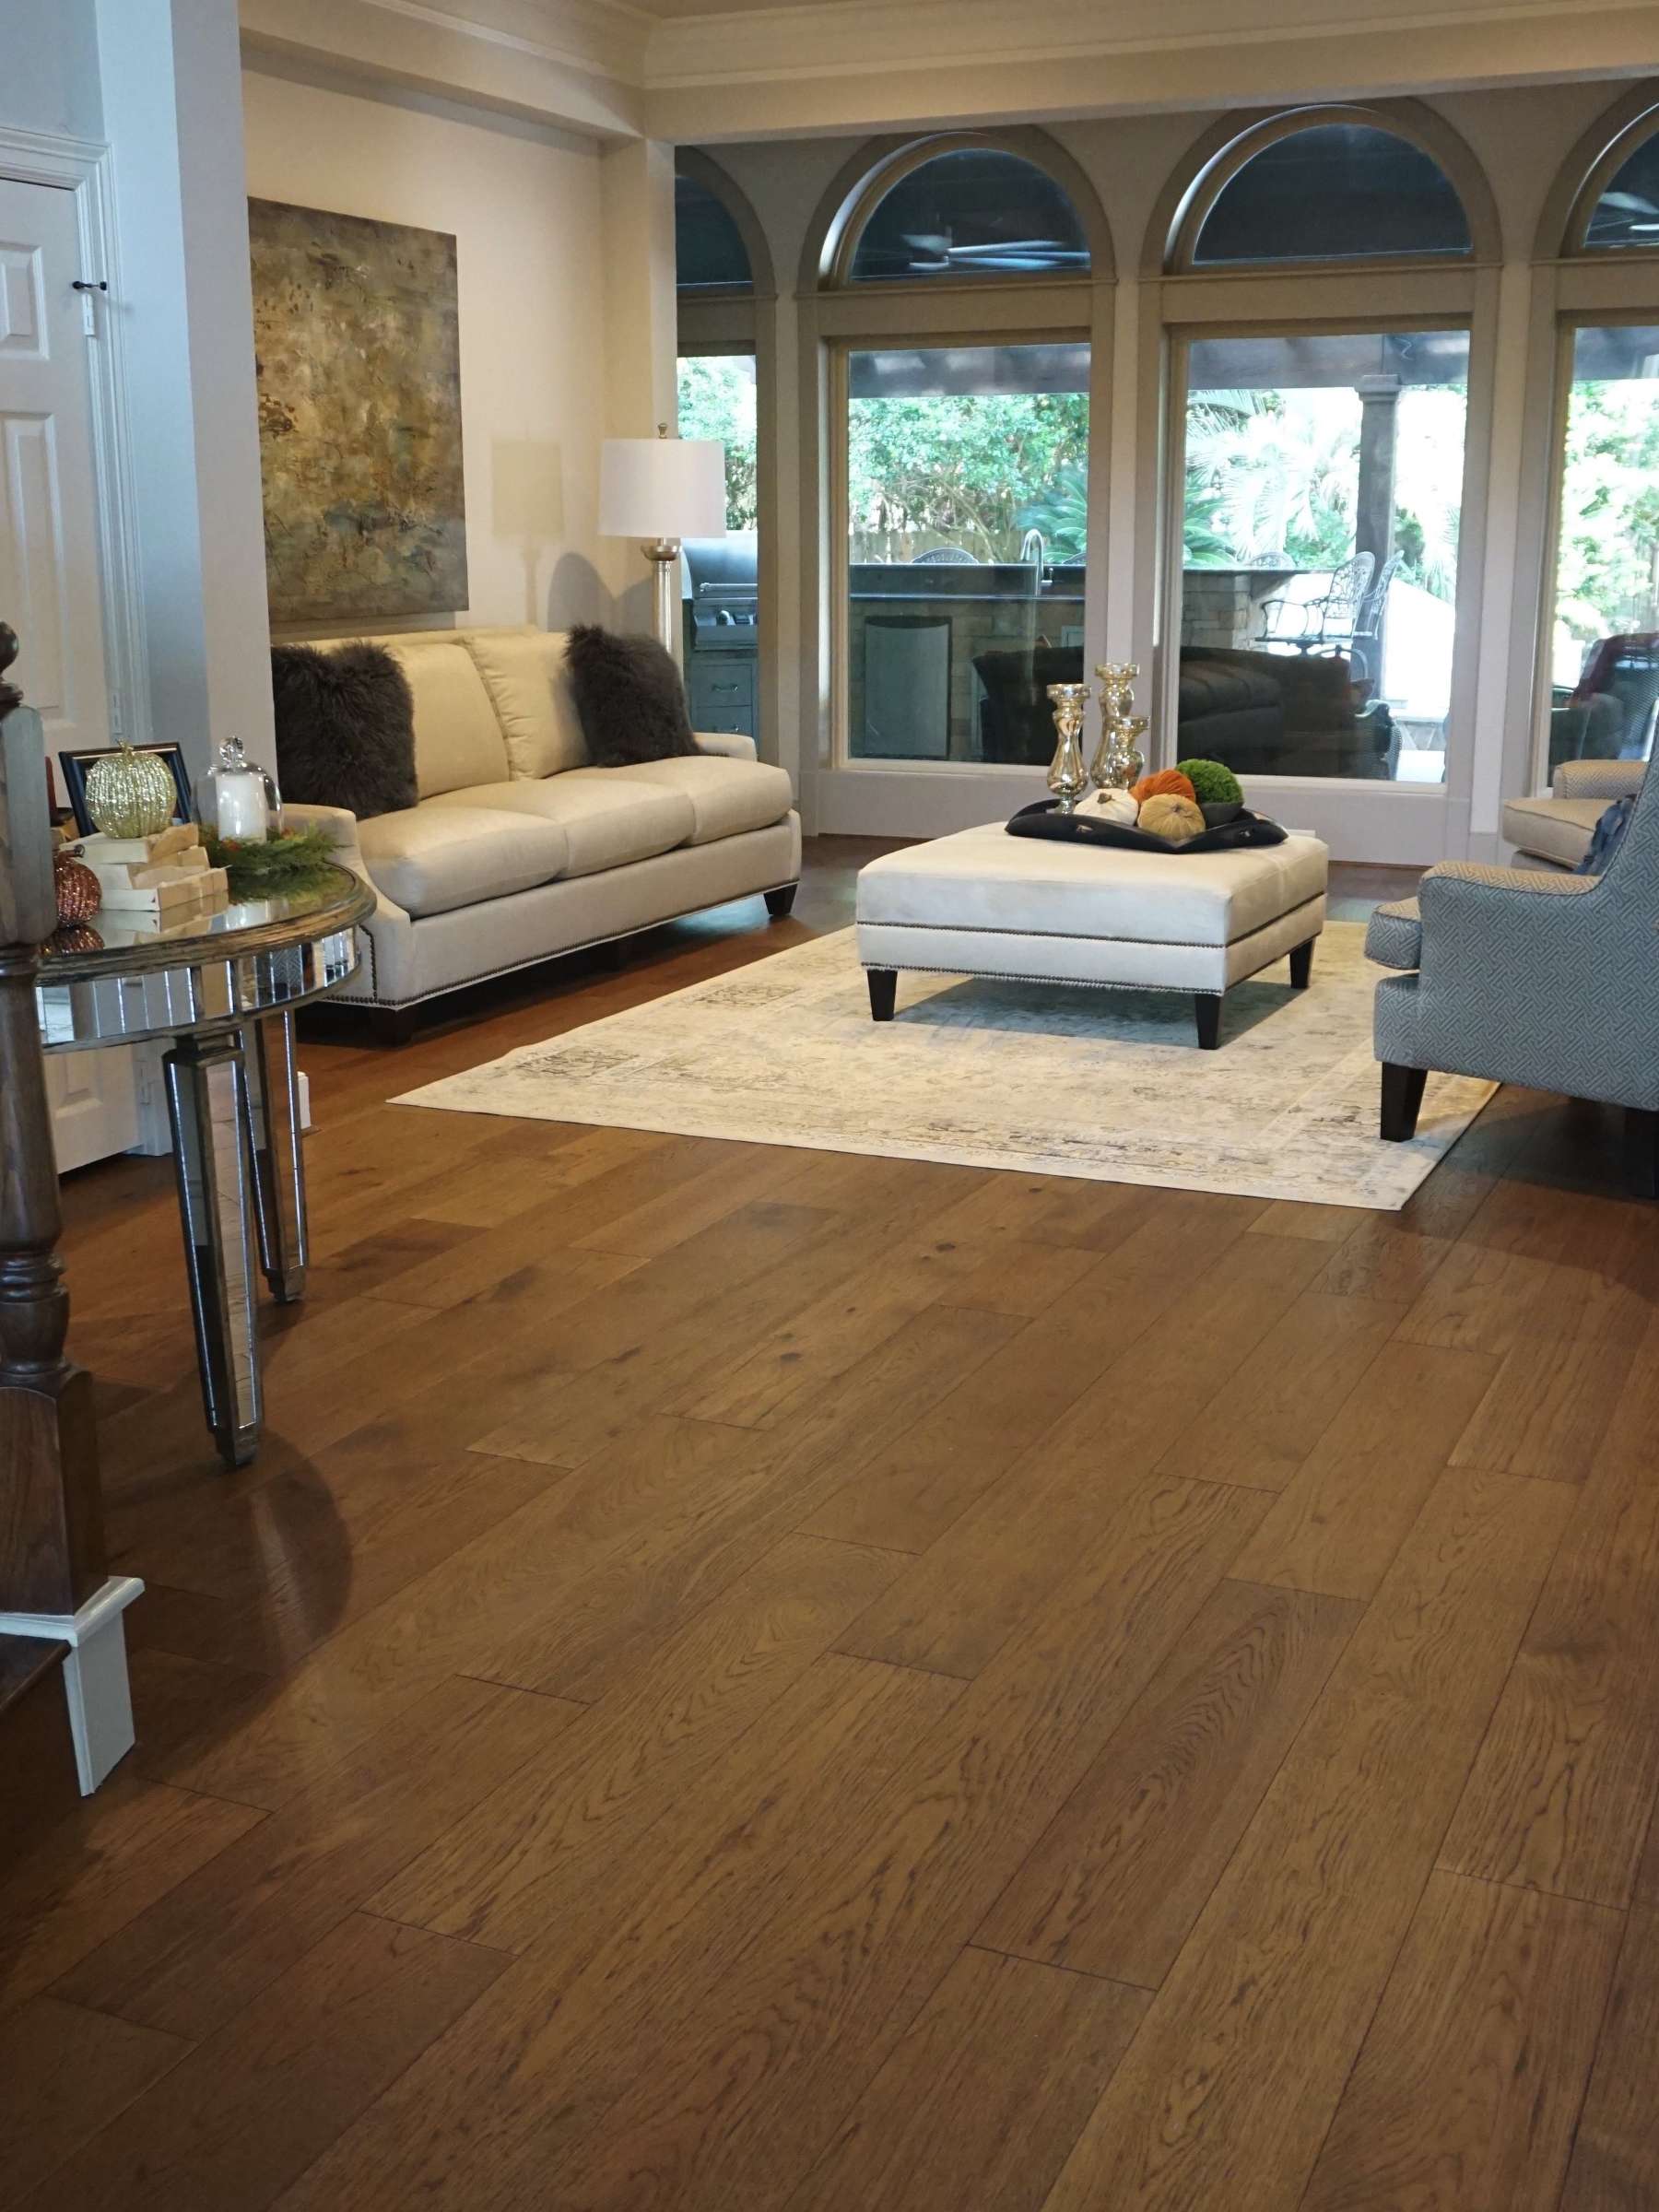 A living room scene sports the rich look of handsome hardwood.